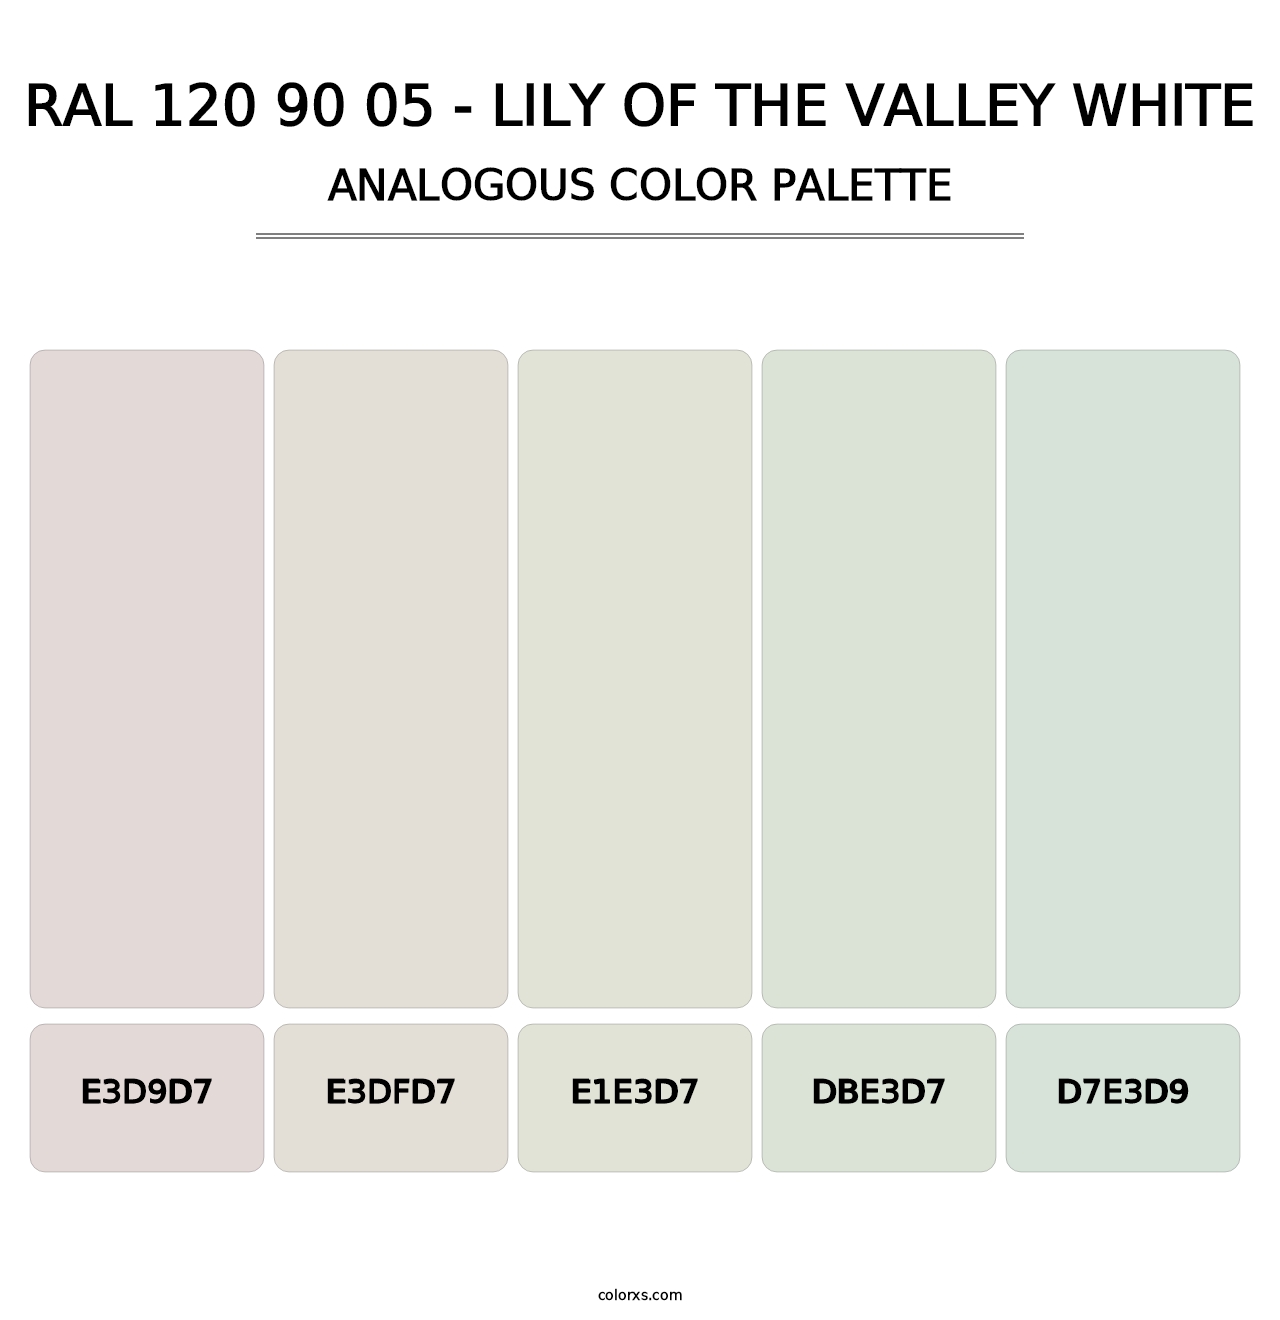 RAL 120 90 05 - Lily of the Valley White - Analogous Color Palette